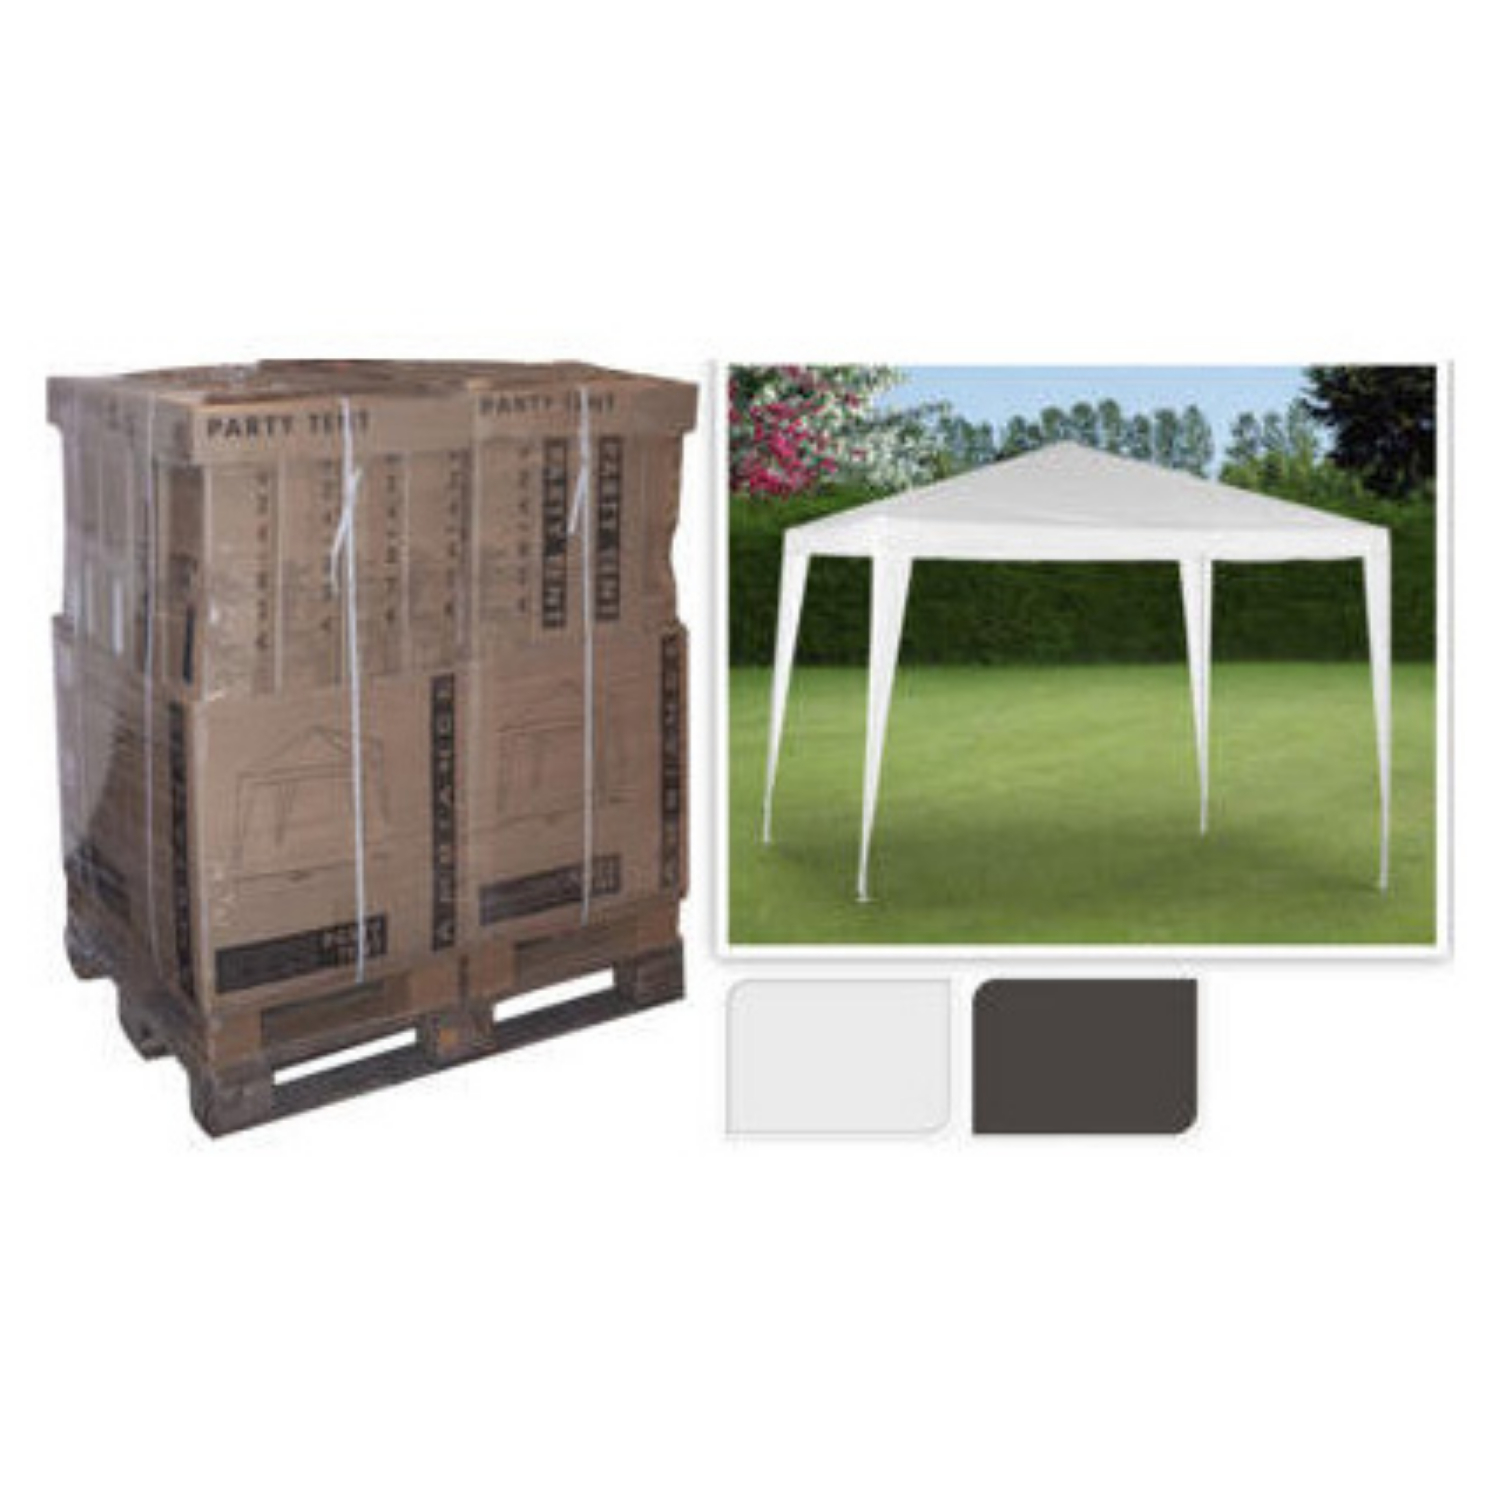 PARTYTENT PE 3 X 3 METER WIT OF TAUPE - 101 1974